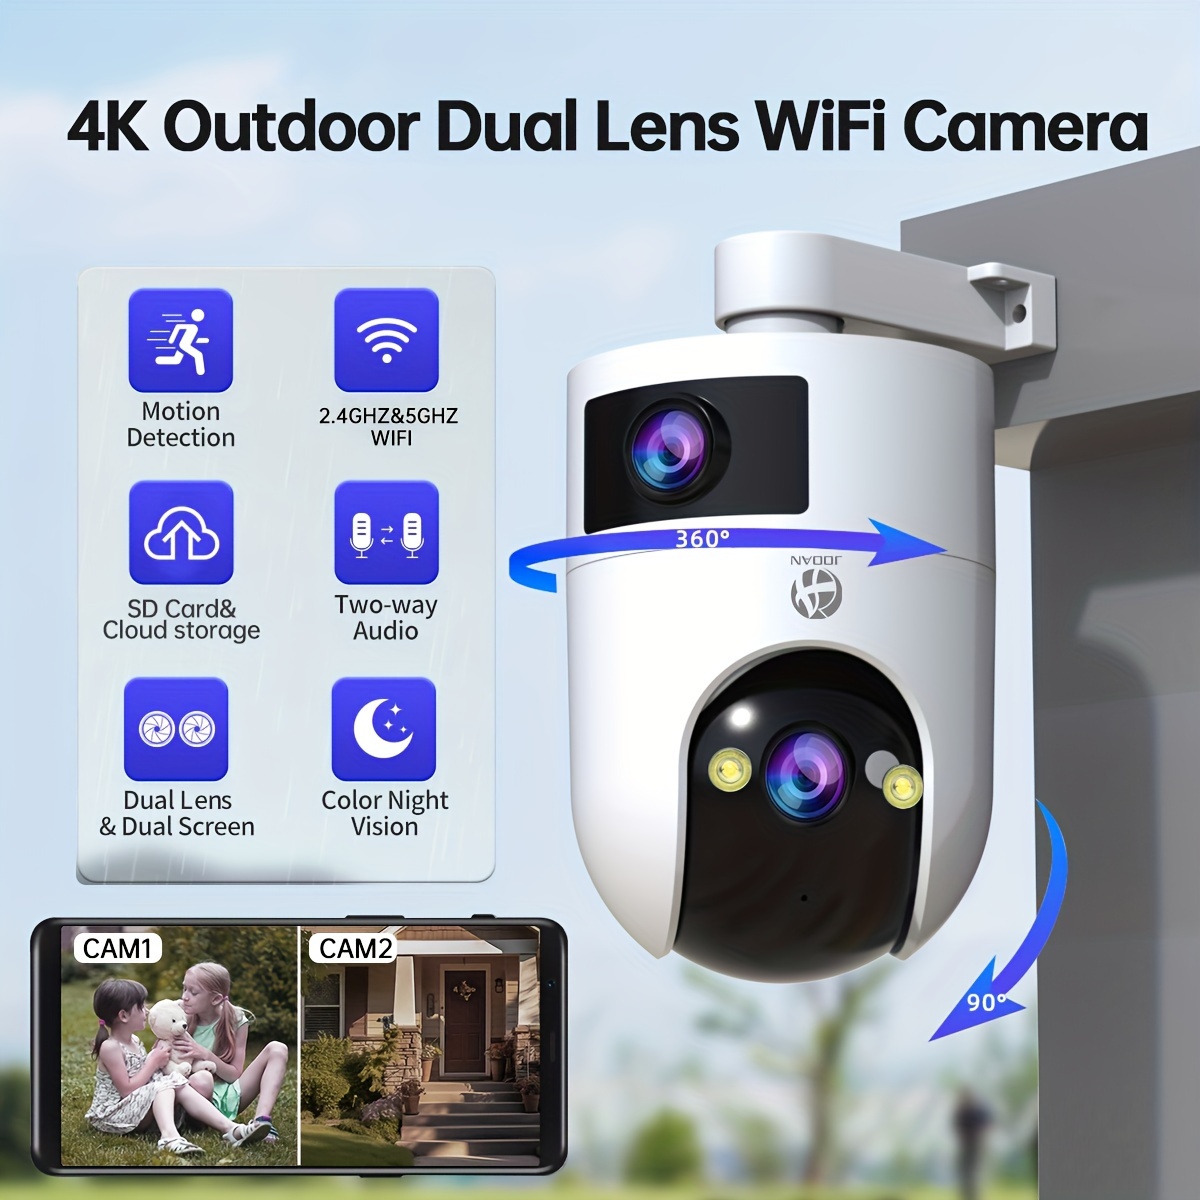 

1pc 4k Dual Lens Wireless Ip Camera, Ptz Outdoor Security Cam With 5g Wifi, Dual Screen, Auto Tracking, Night Vision, Two-way Audio, Motion Detection For Home Street Safety And Monitor